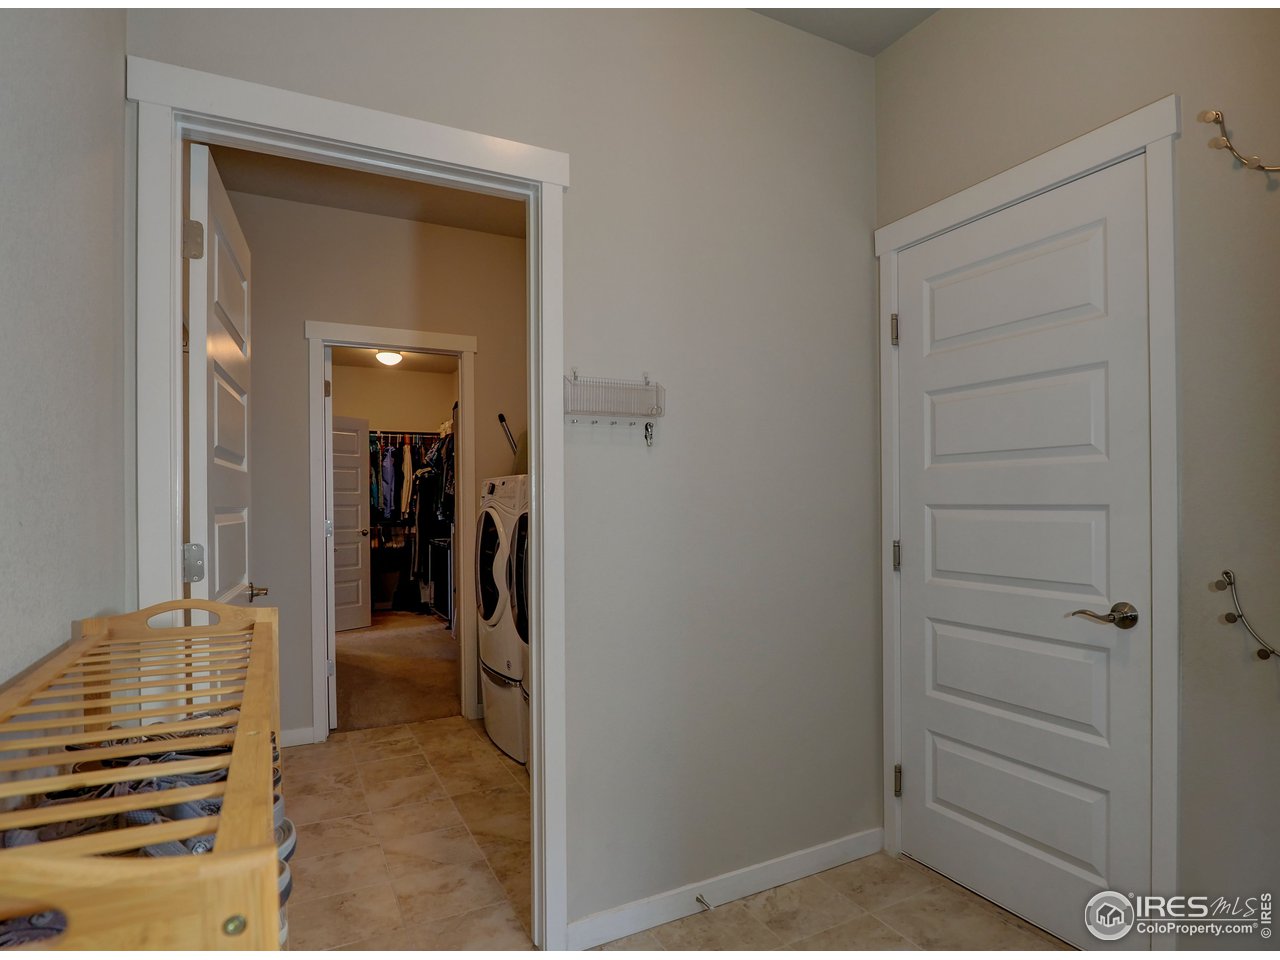 Garage entry to mudroom to laundry to master closet